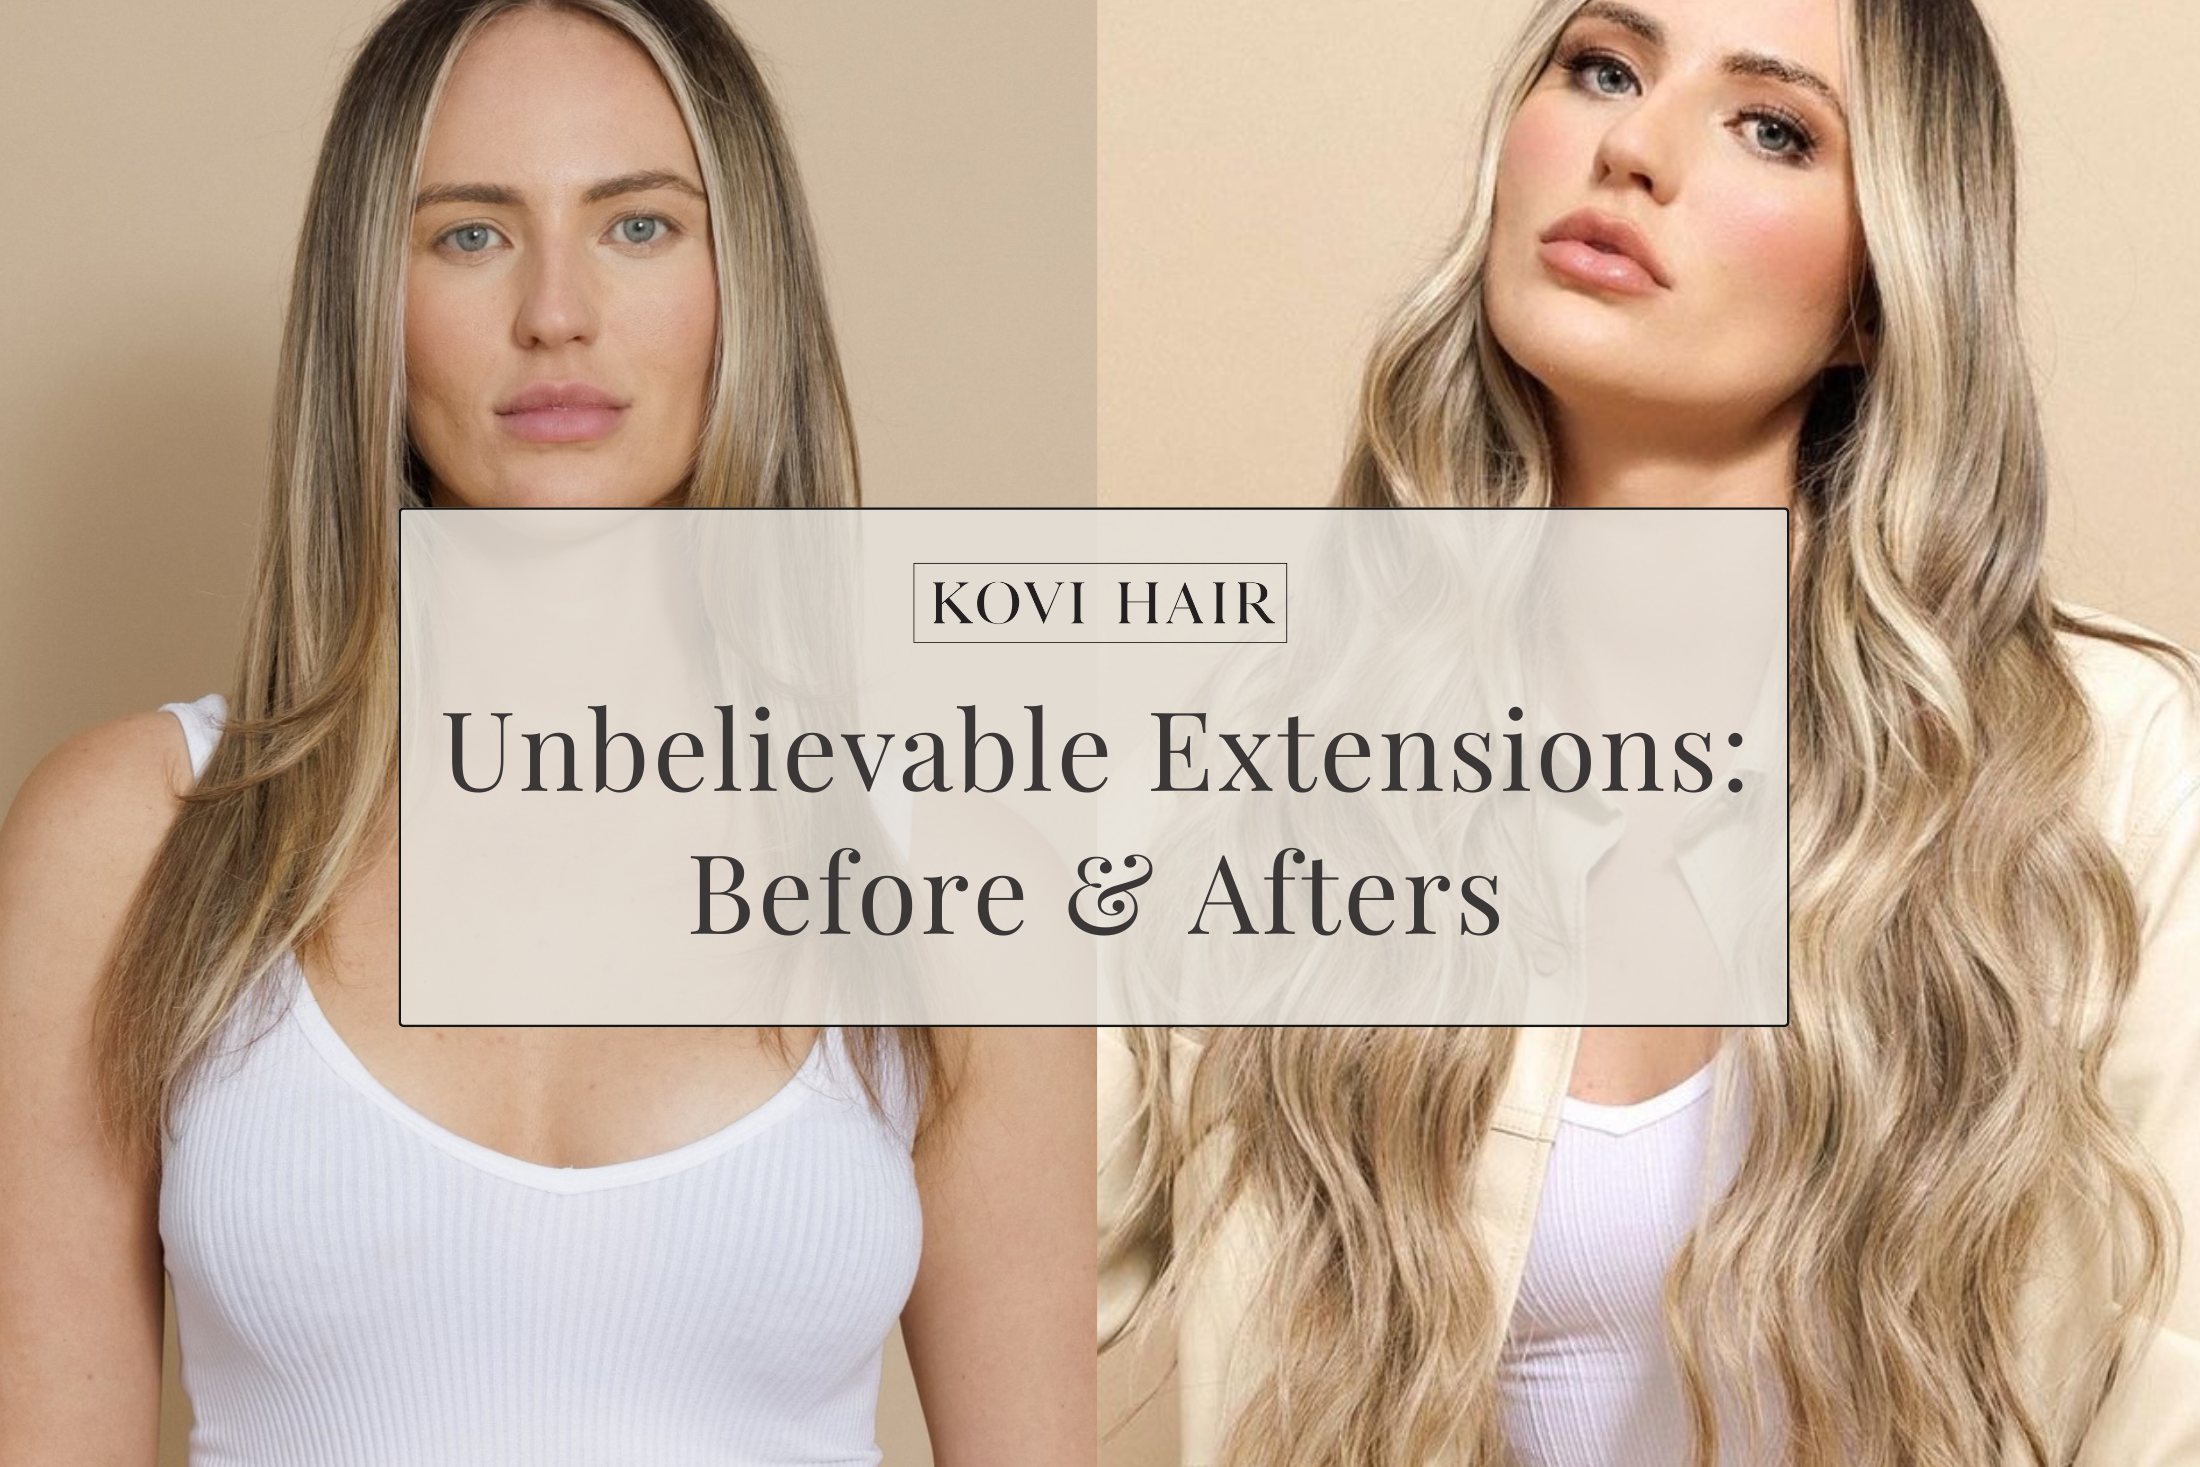 10 Unbelievable Extensions: Before & Afters – KOVI HAIR